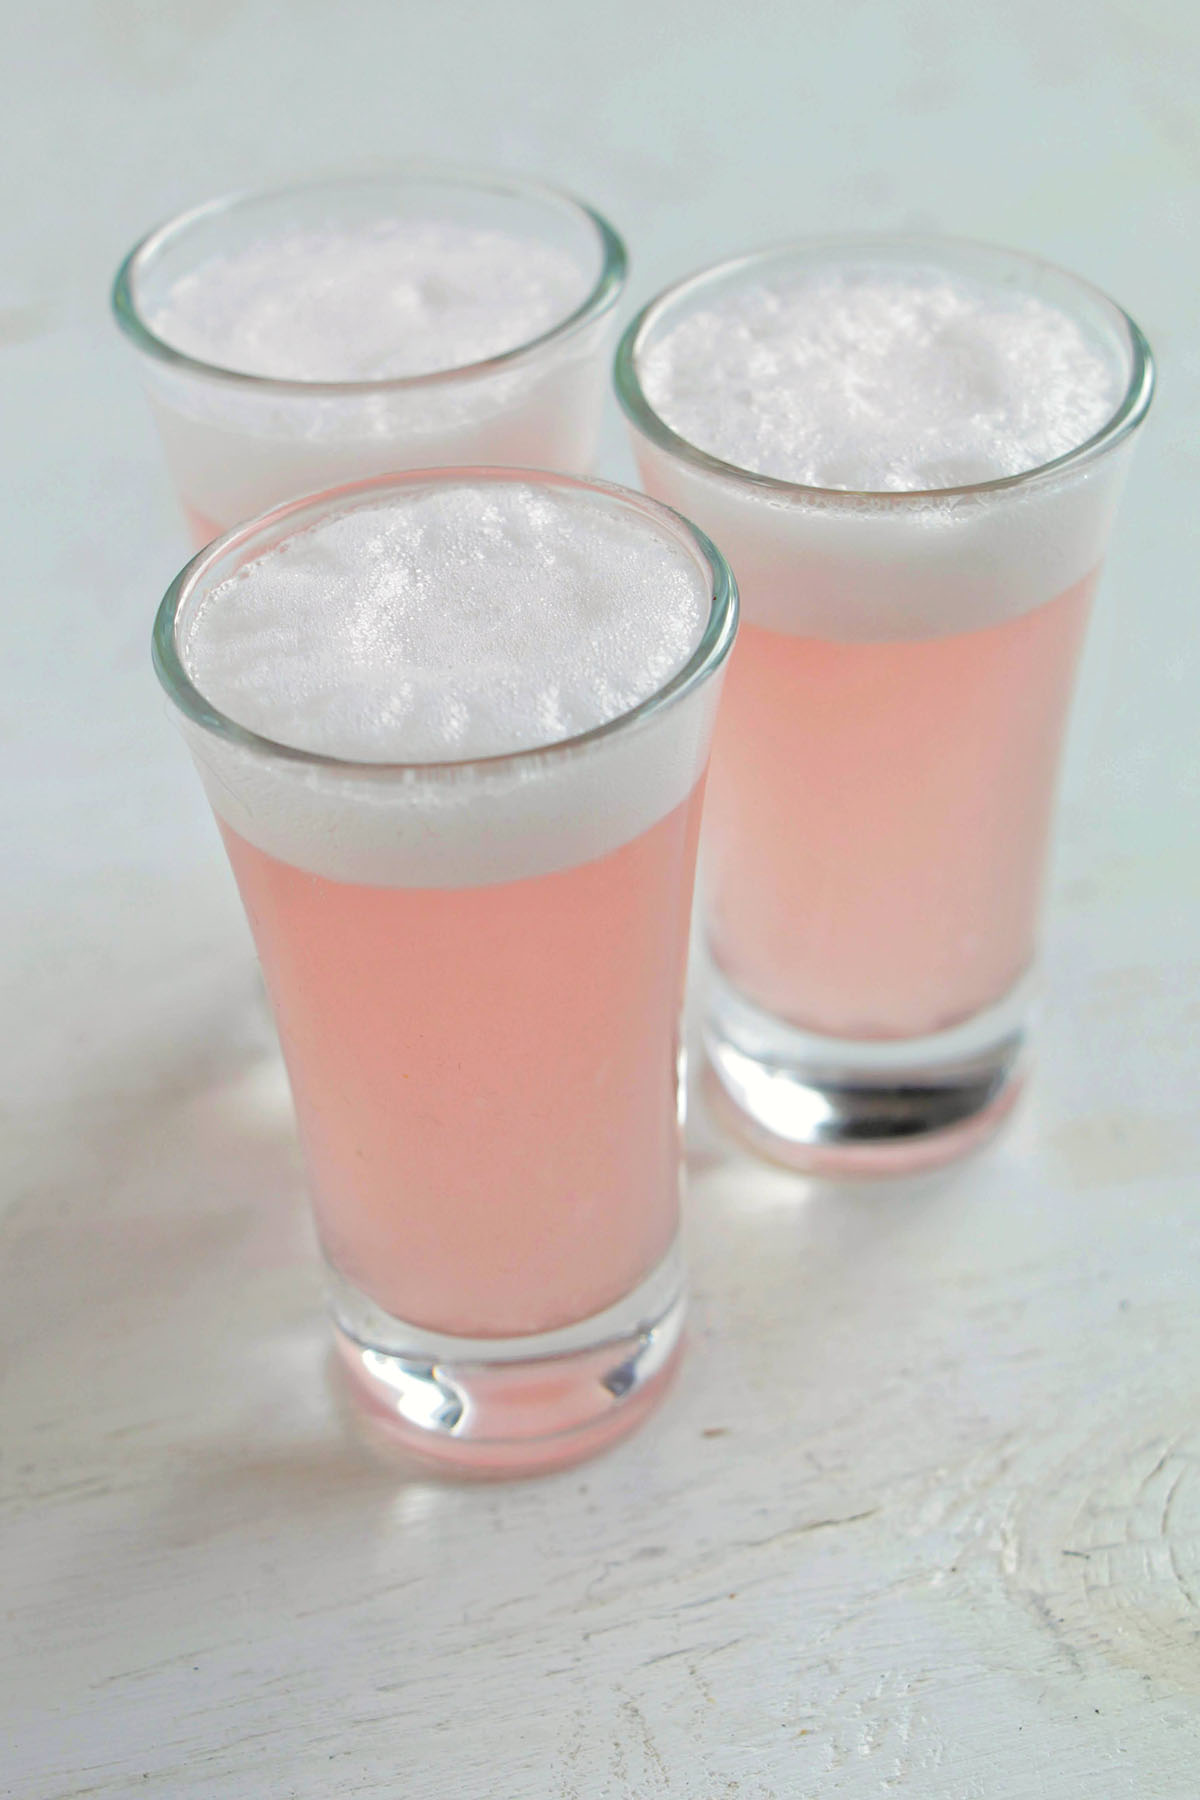 three clover club shots with egg white tops.